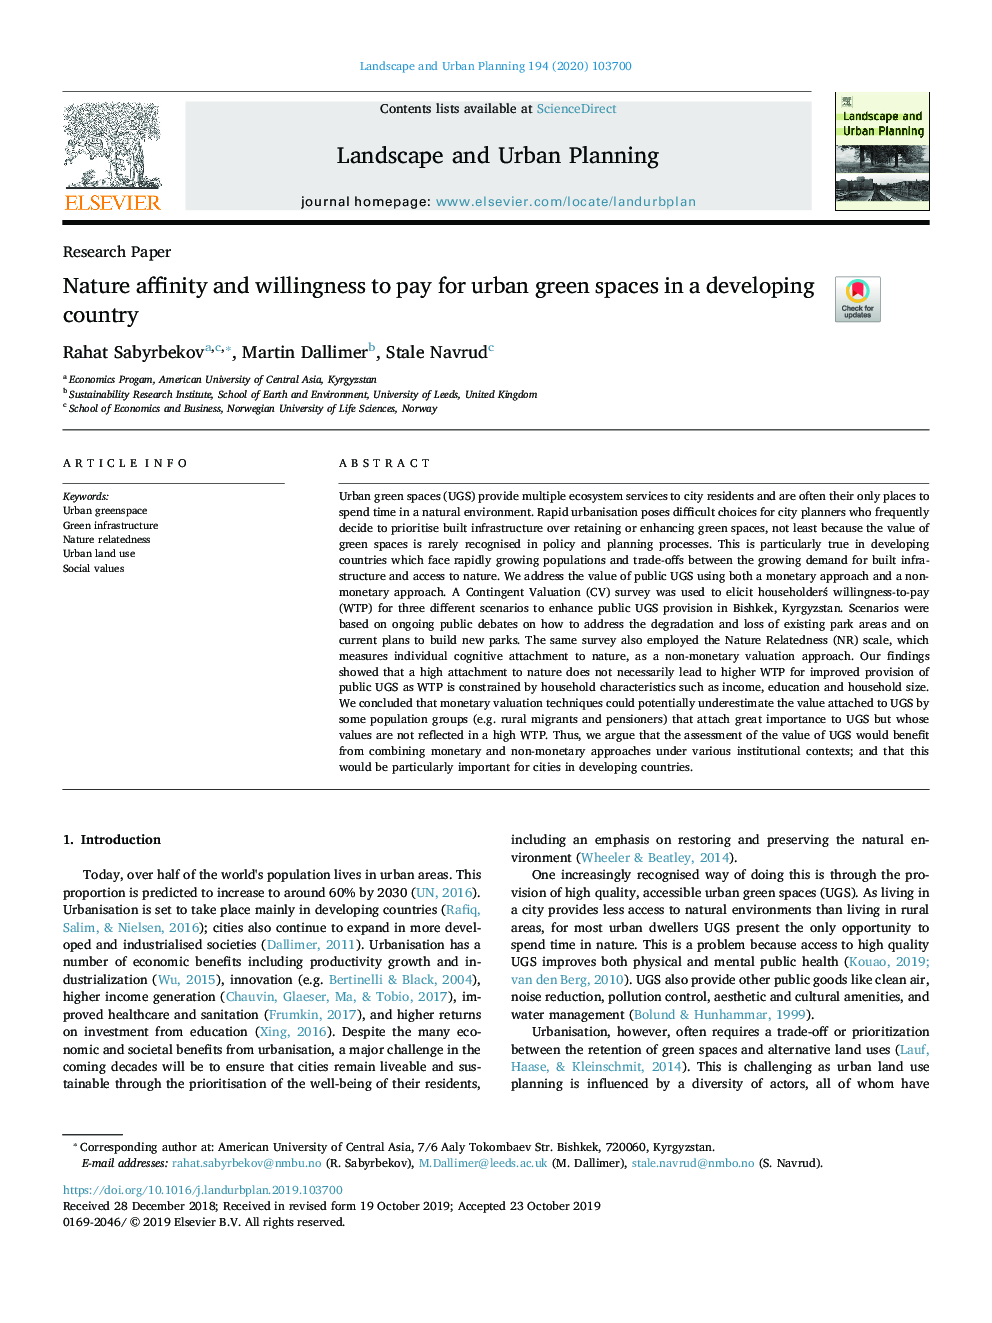 Nature affinity and willingness to pay for urban green spaces in a developing country